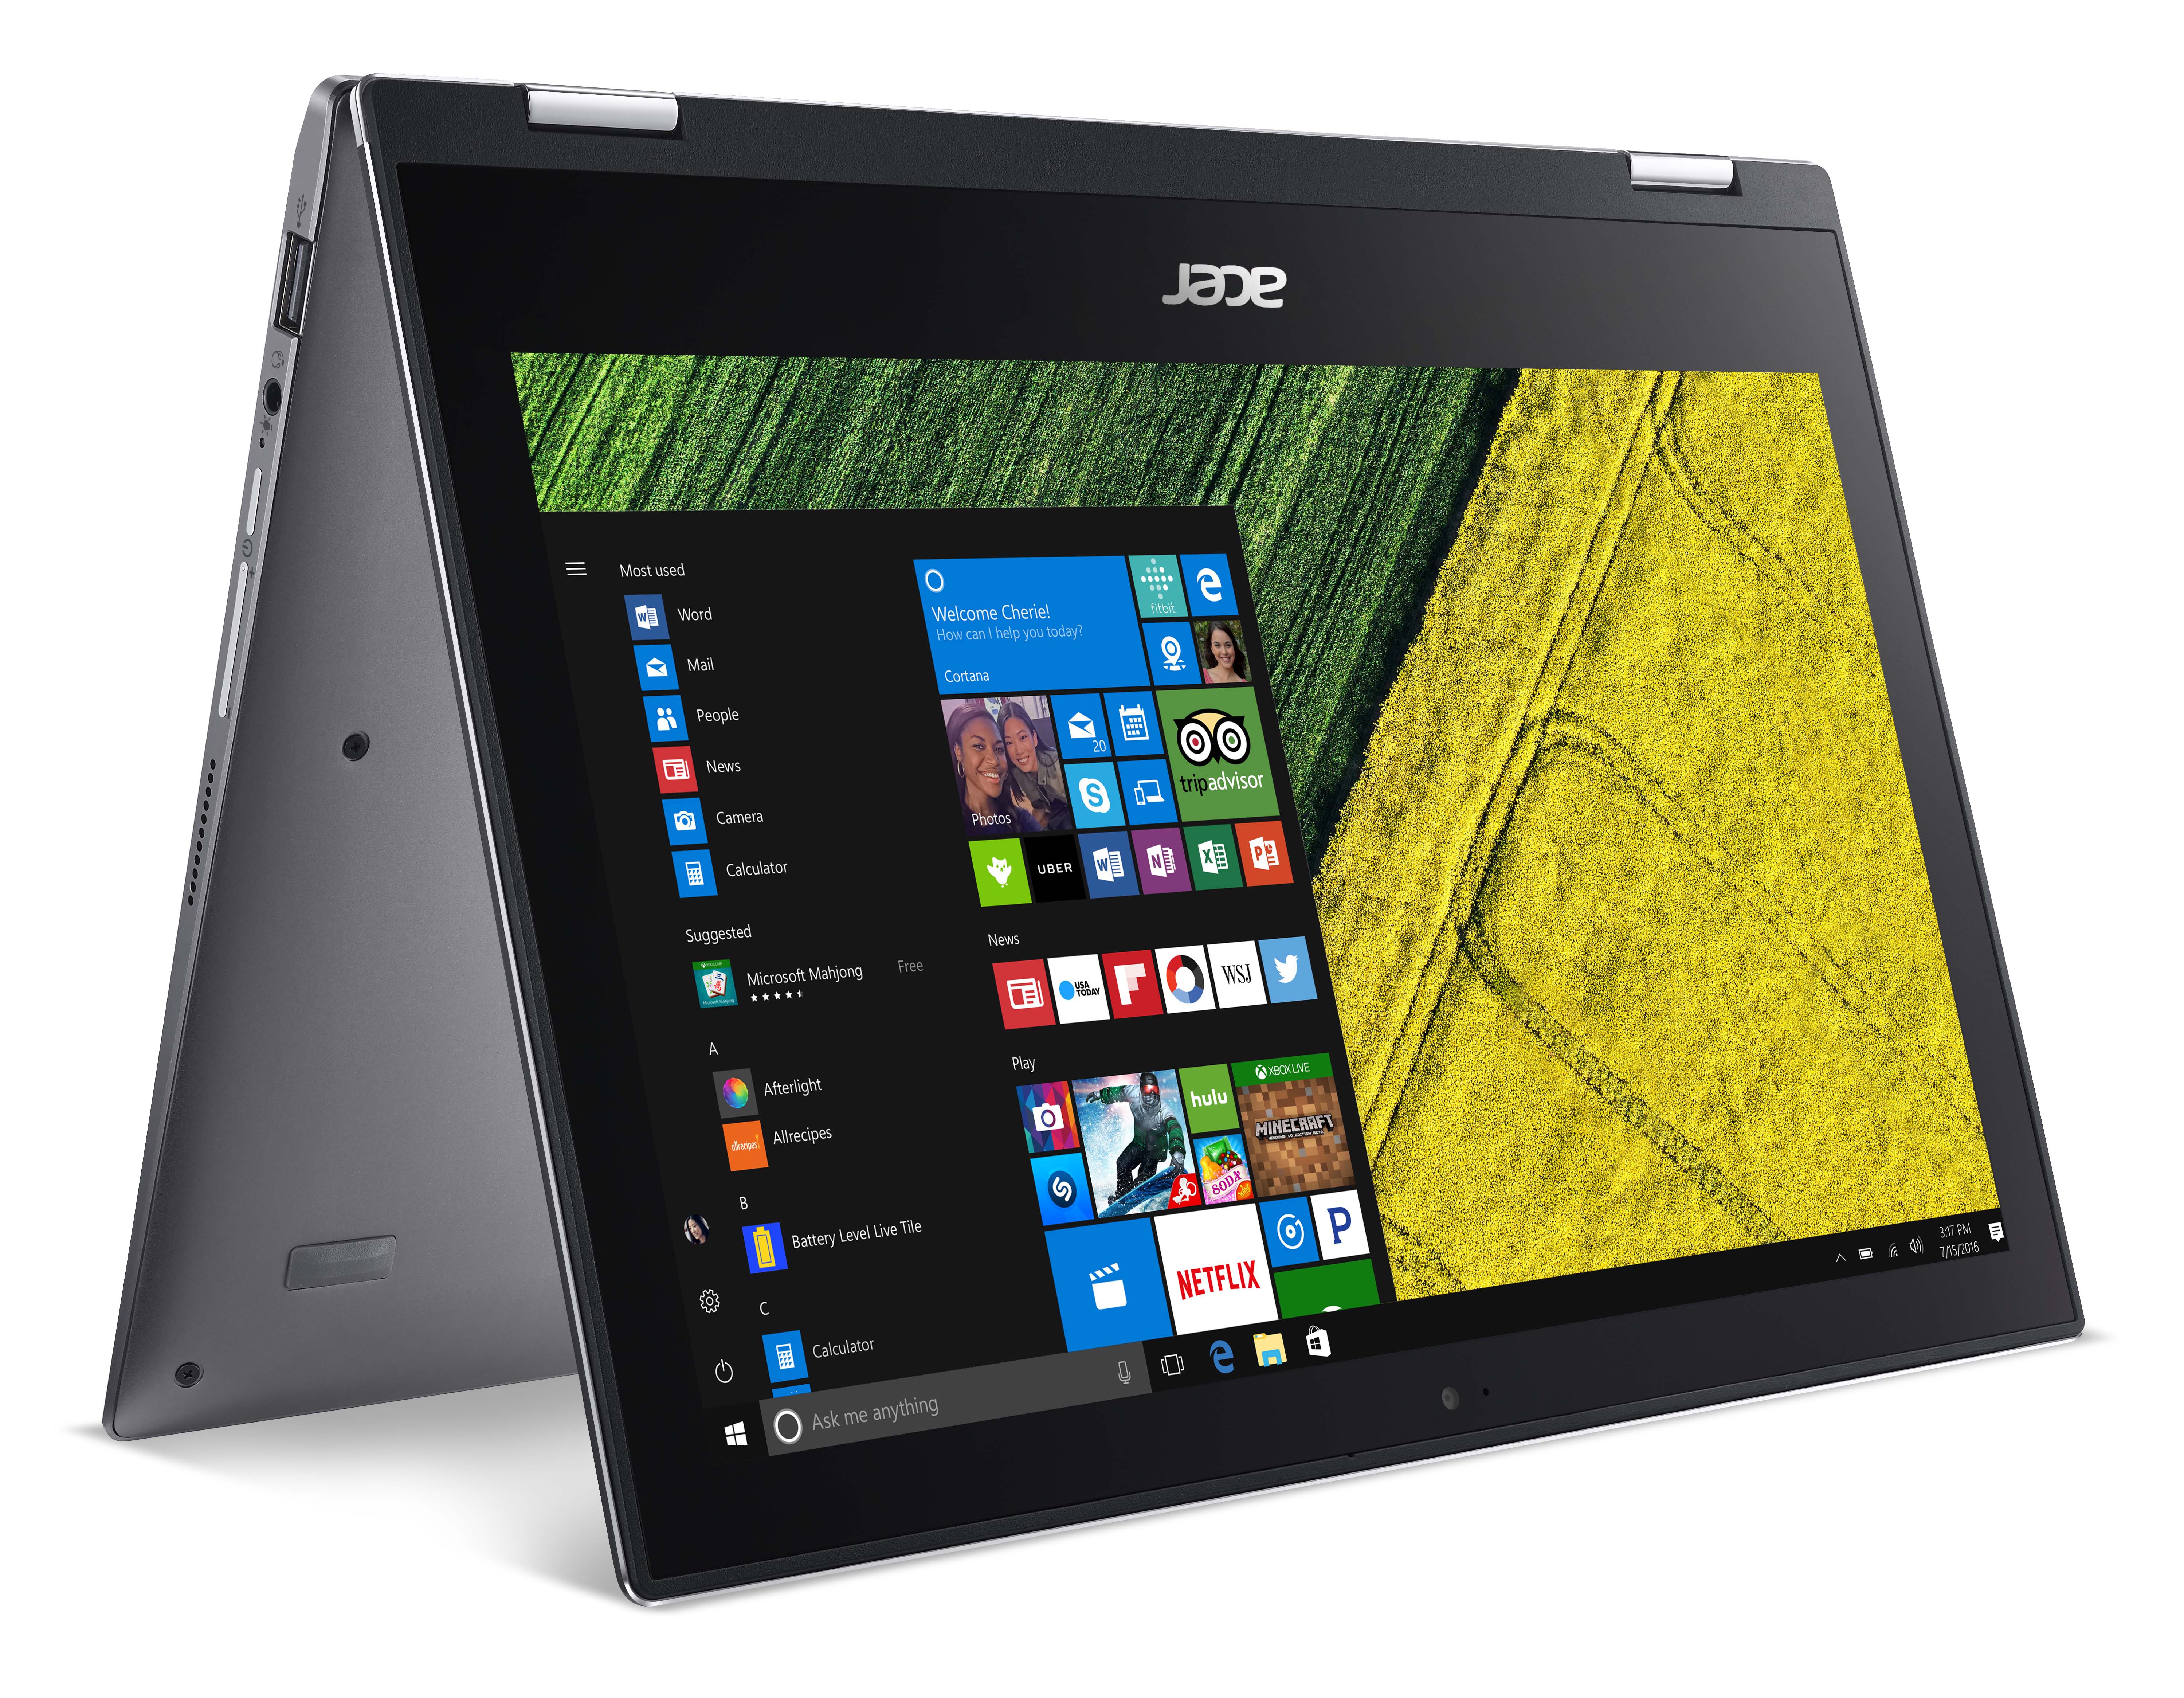 Acer Spin 1 in tent mode